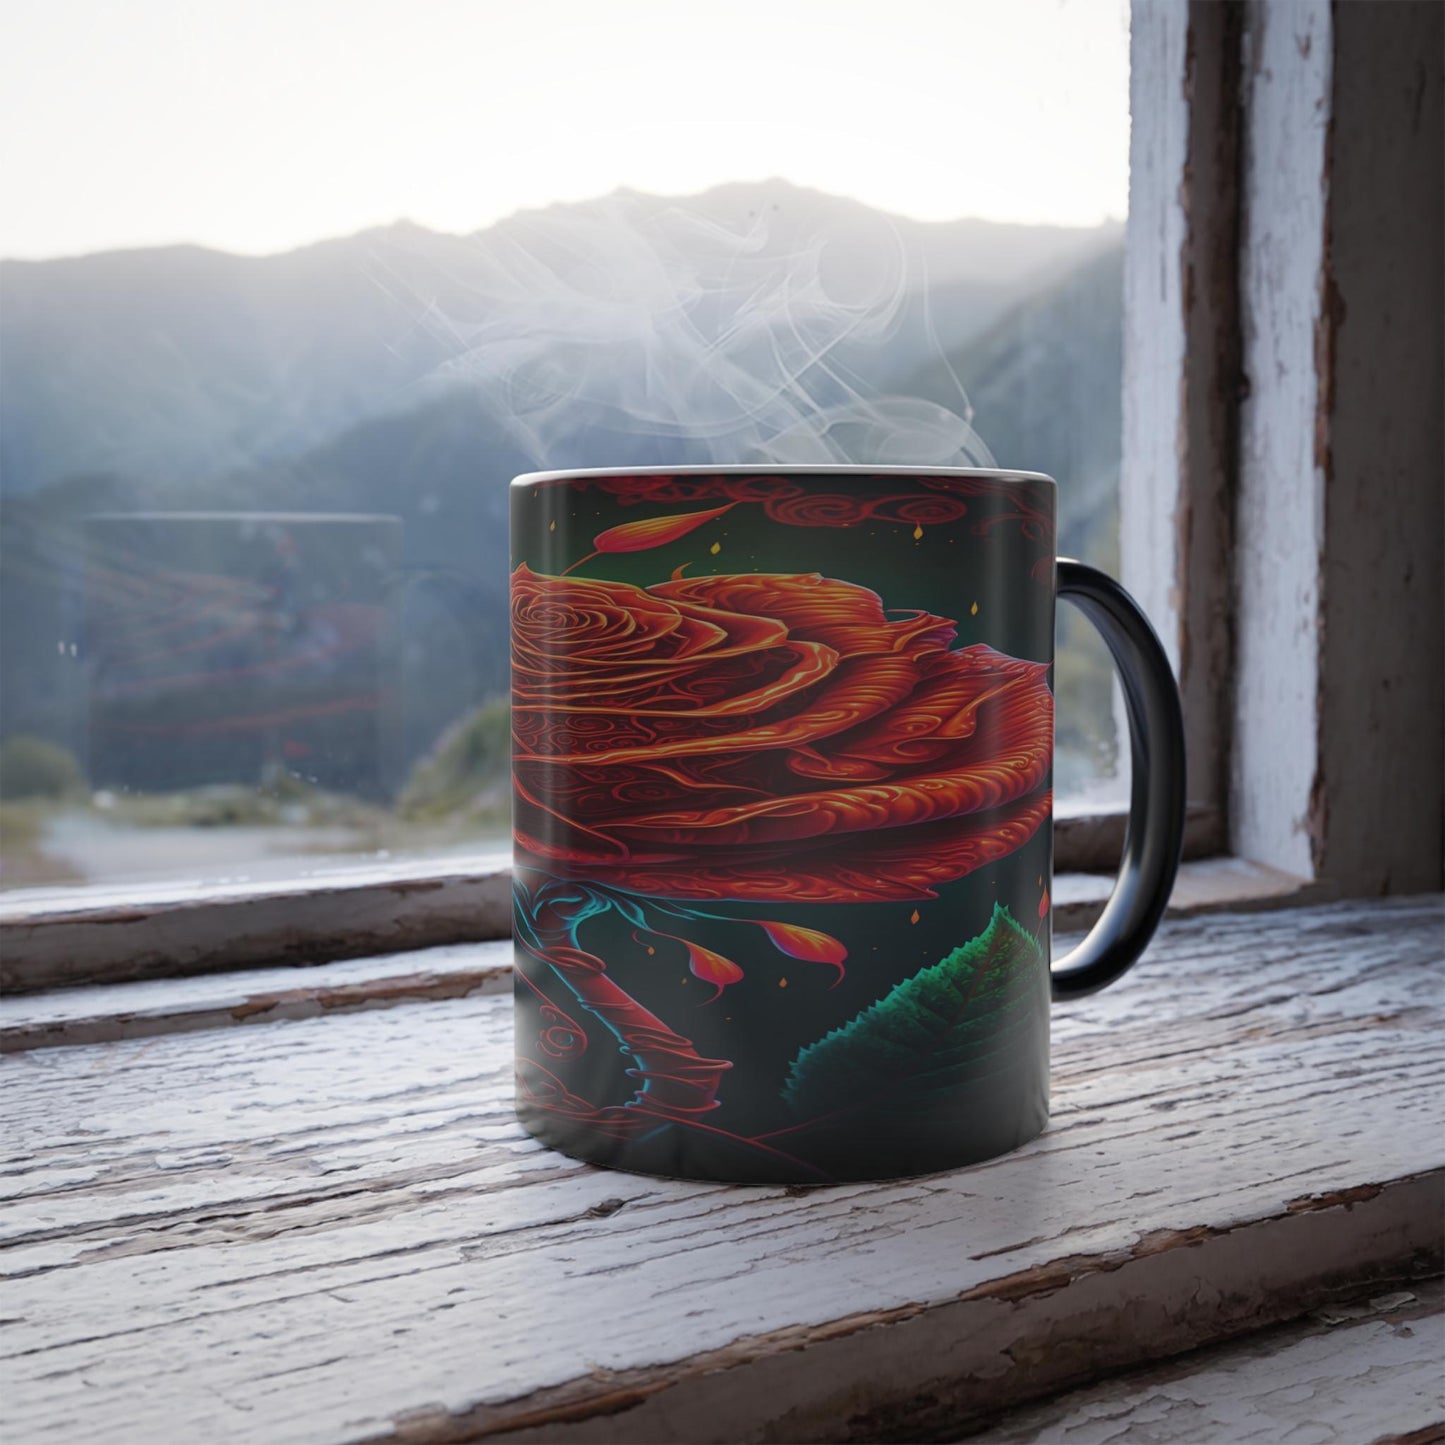 Enchanting Flower Magic Morphing Mug 11oz - Lovely Heat Sensitive Coffee Tea Cup with Flower, Rose, Tree, Heart Designs - Special Gifts for Flower Lovers 14